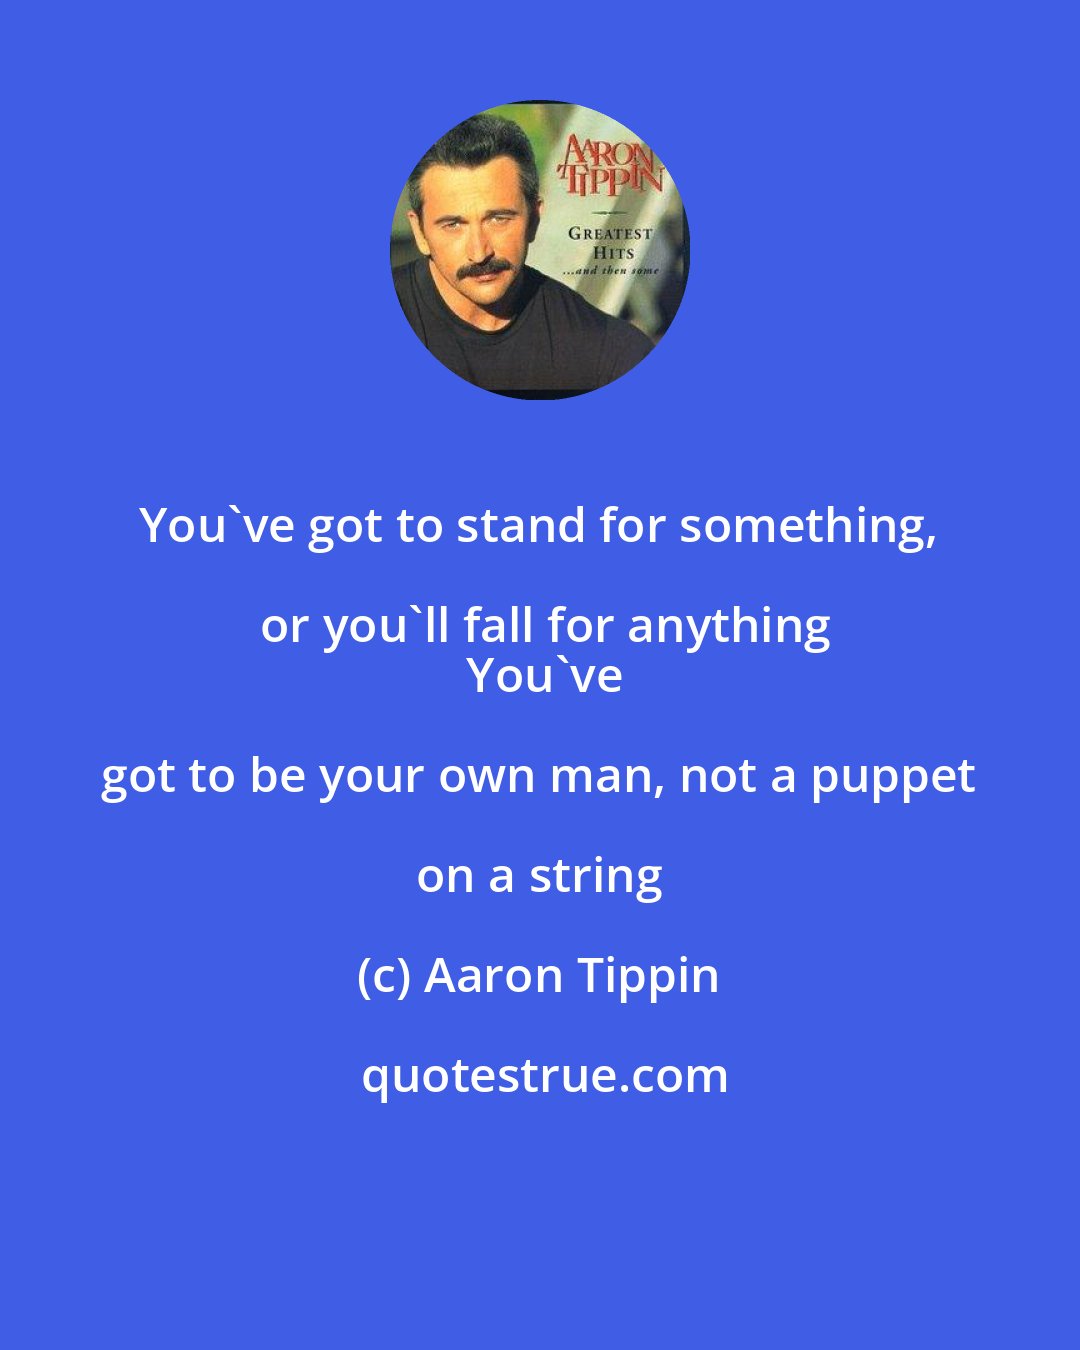 Aaron Tippin: You've got to stand for something, or you'll fall for anything
  You've got to be your own man, not a puppet on a string